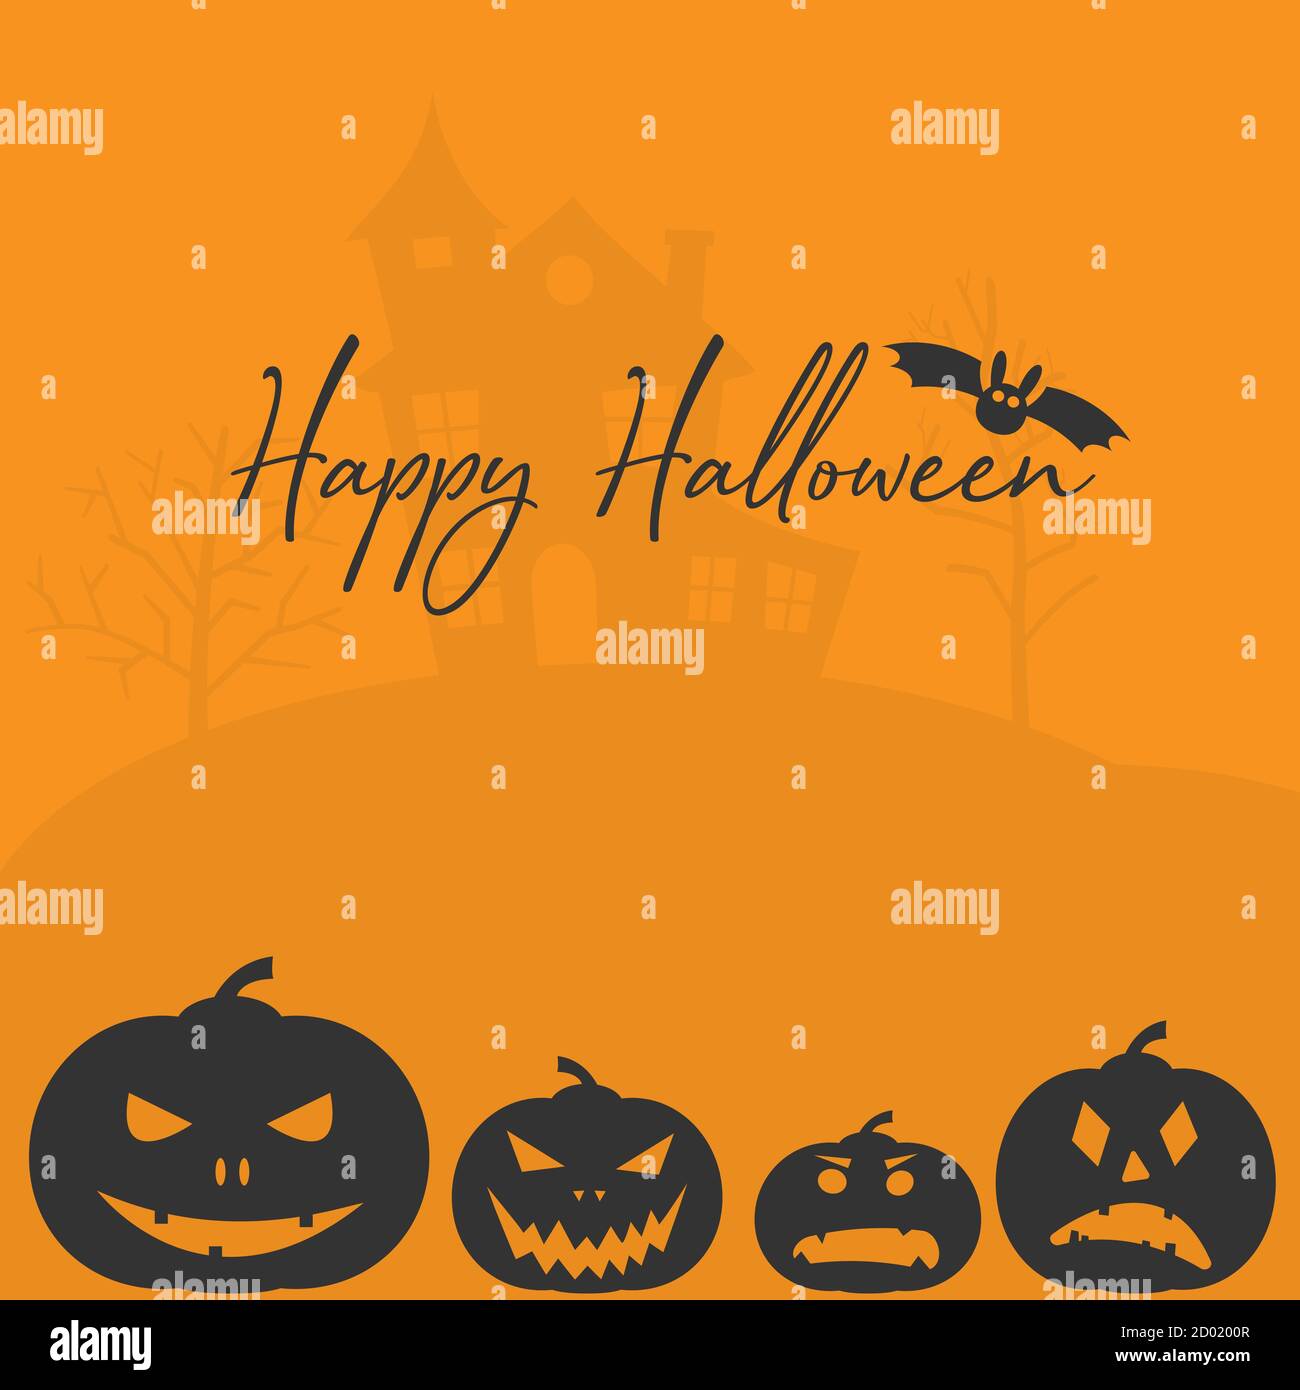 Happy Halloween greeting card or social media template with jack-o-lantern and bat vector illustration Stock Vector